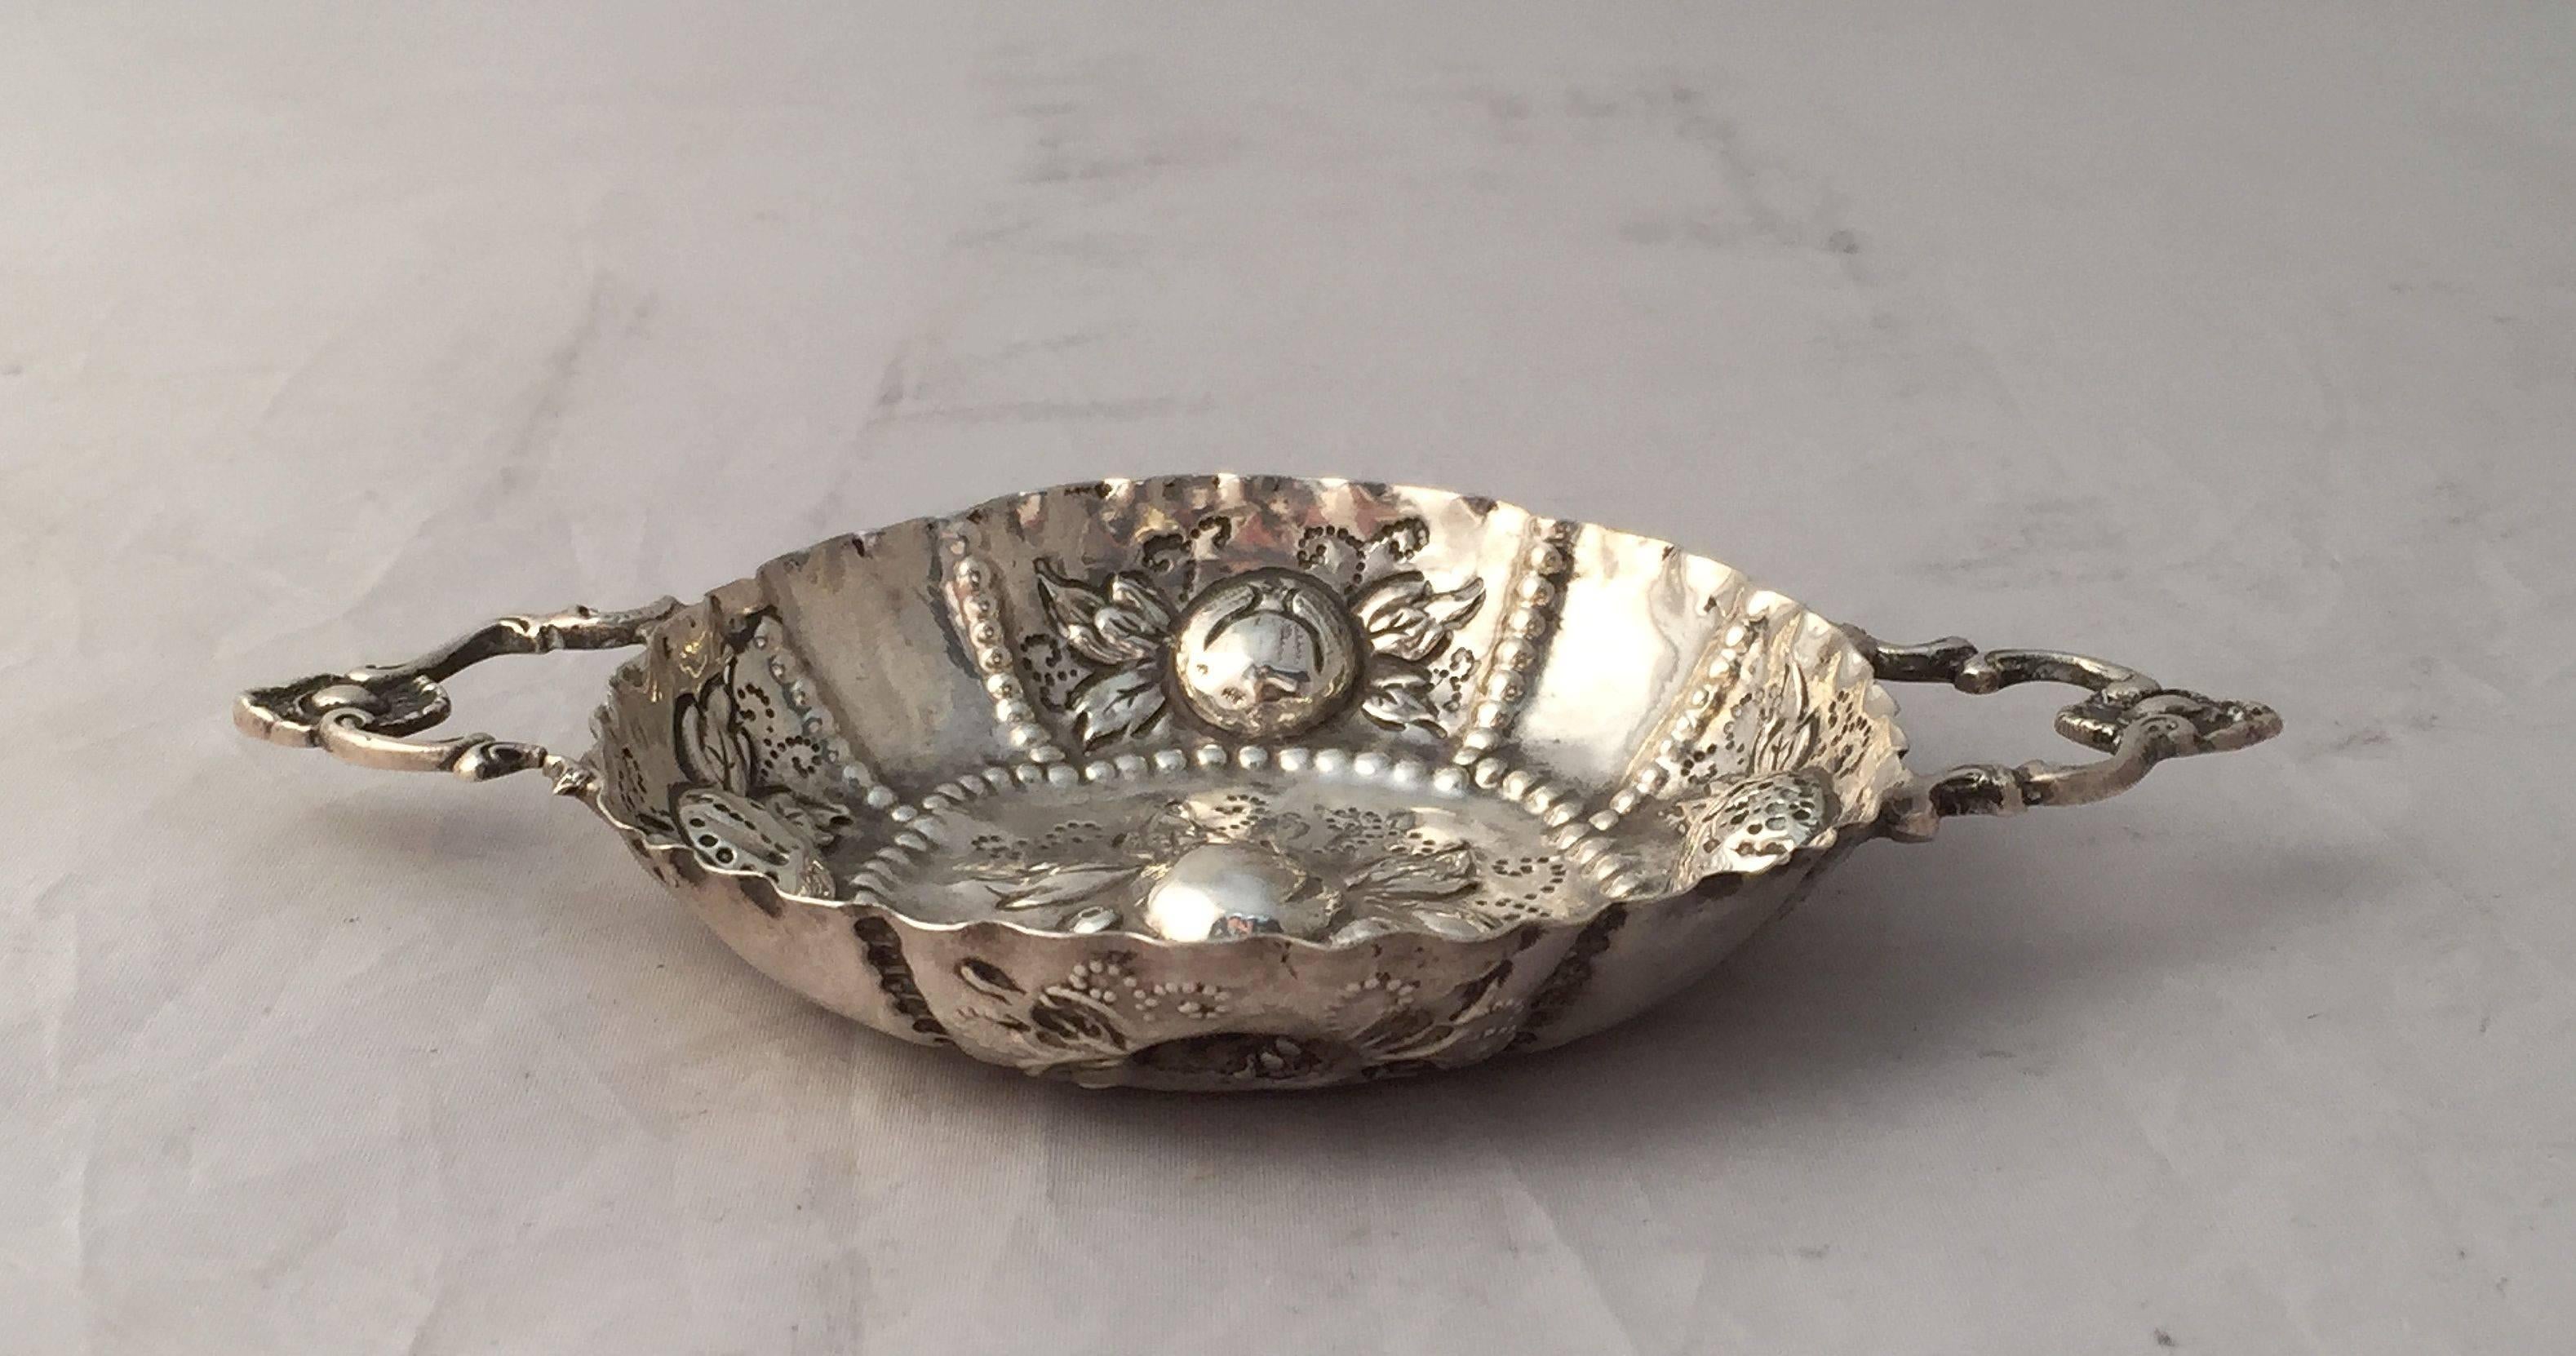 A fine wine taster or tasting dish from Germany, circa 1890, featuring an embossed design of fruit, serpentine edge, and two handles

Impressed mark: 800 silver.

Originally created by wine makers in order to assess the clarity and color of wine